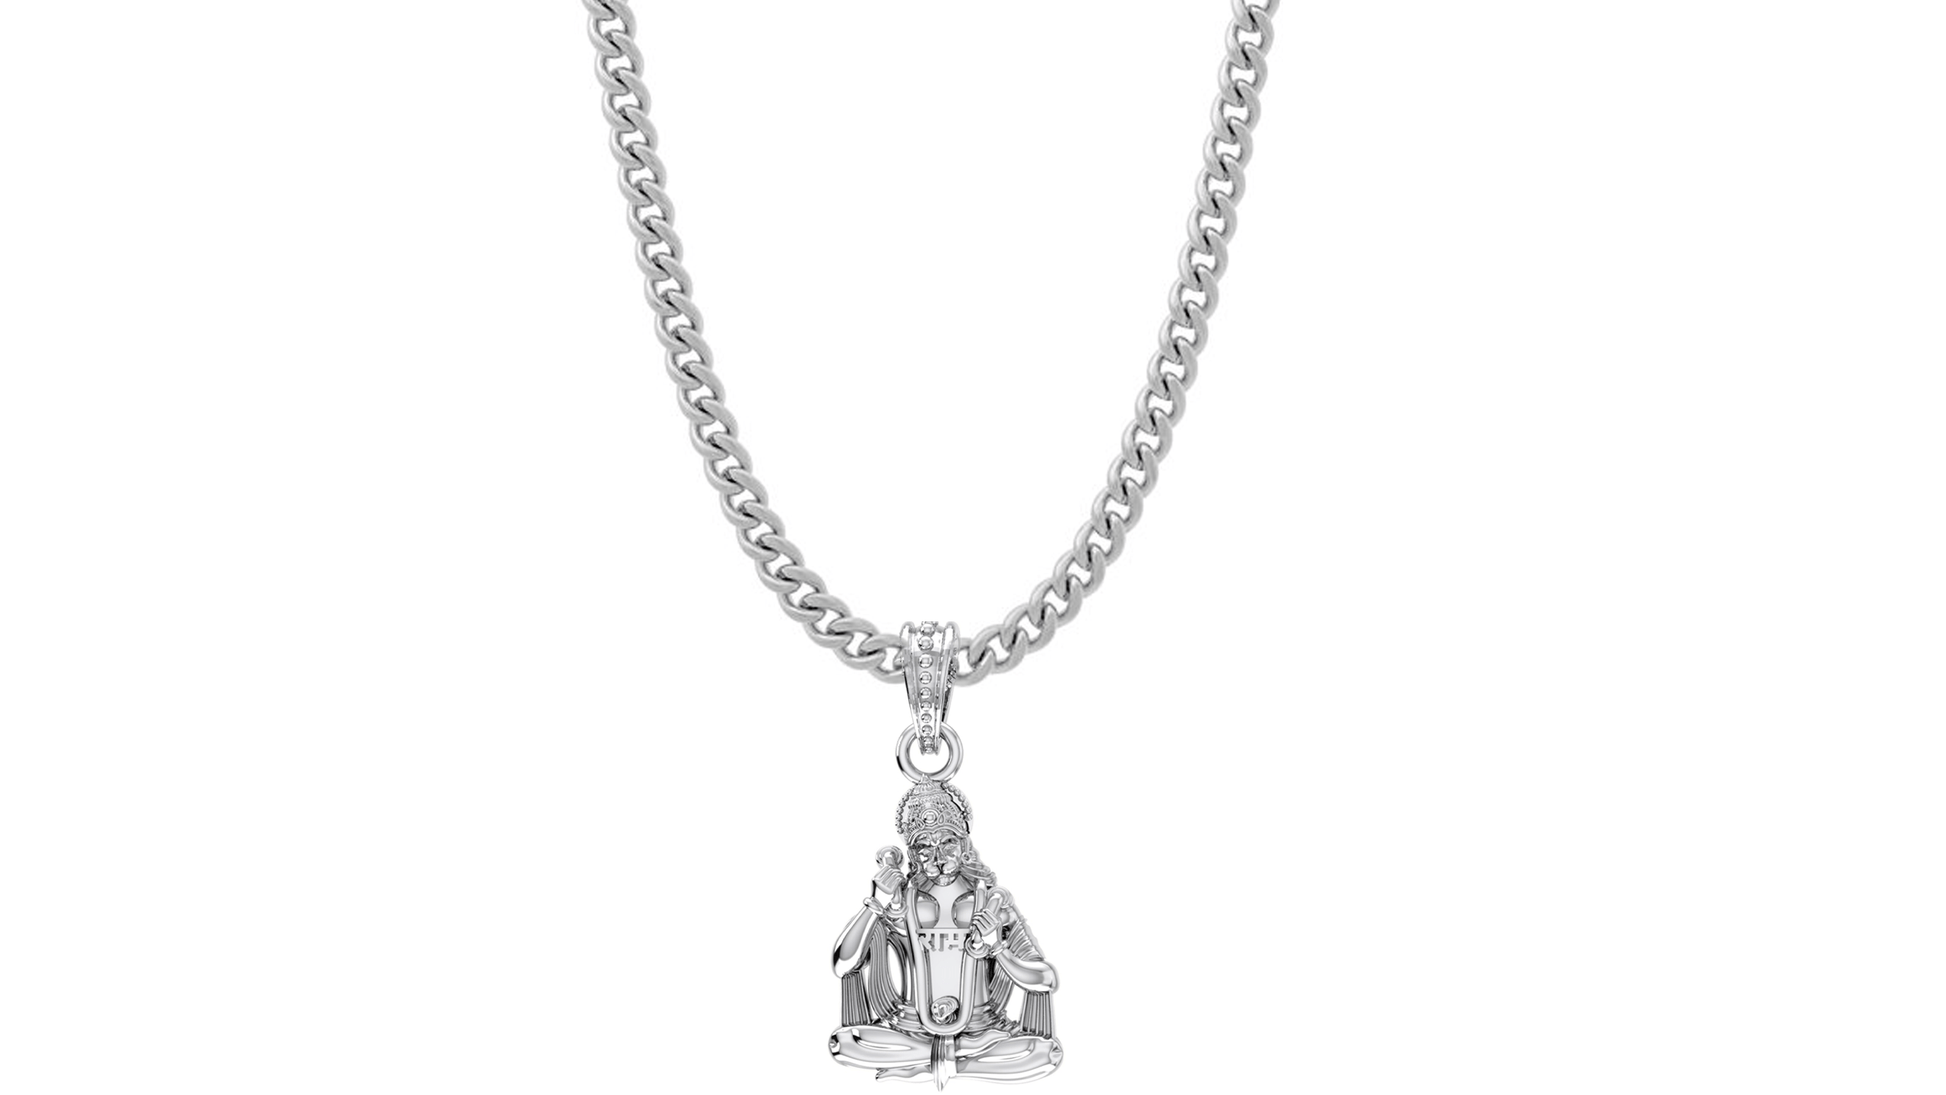 God Hanuman Chain Pendant (Pendant with Curb Chain- 22 inches) for Men & Women Pure Silver Lord bajrang bali Chain Locket for Good Health & Wealth Akshat Sapphire